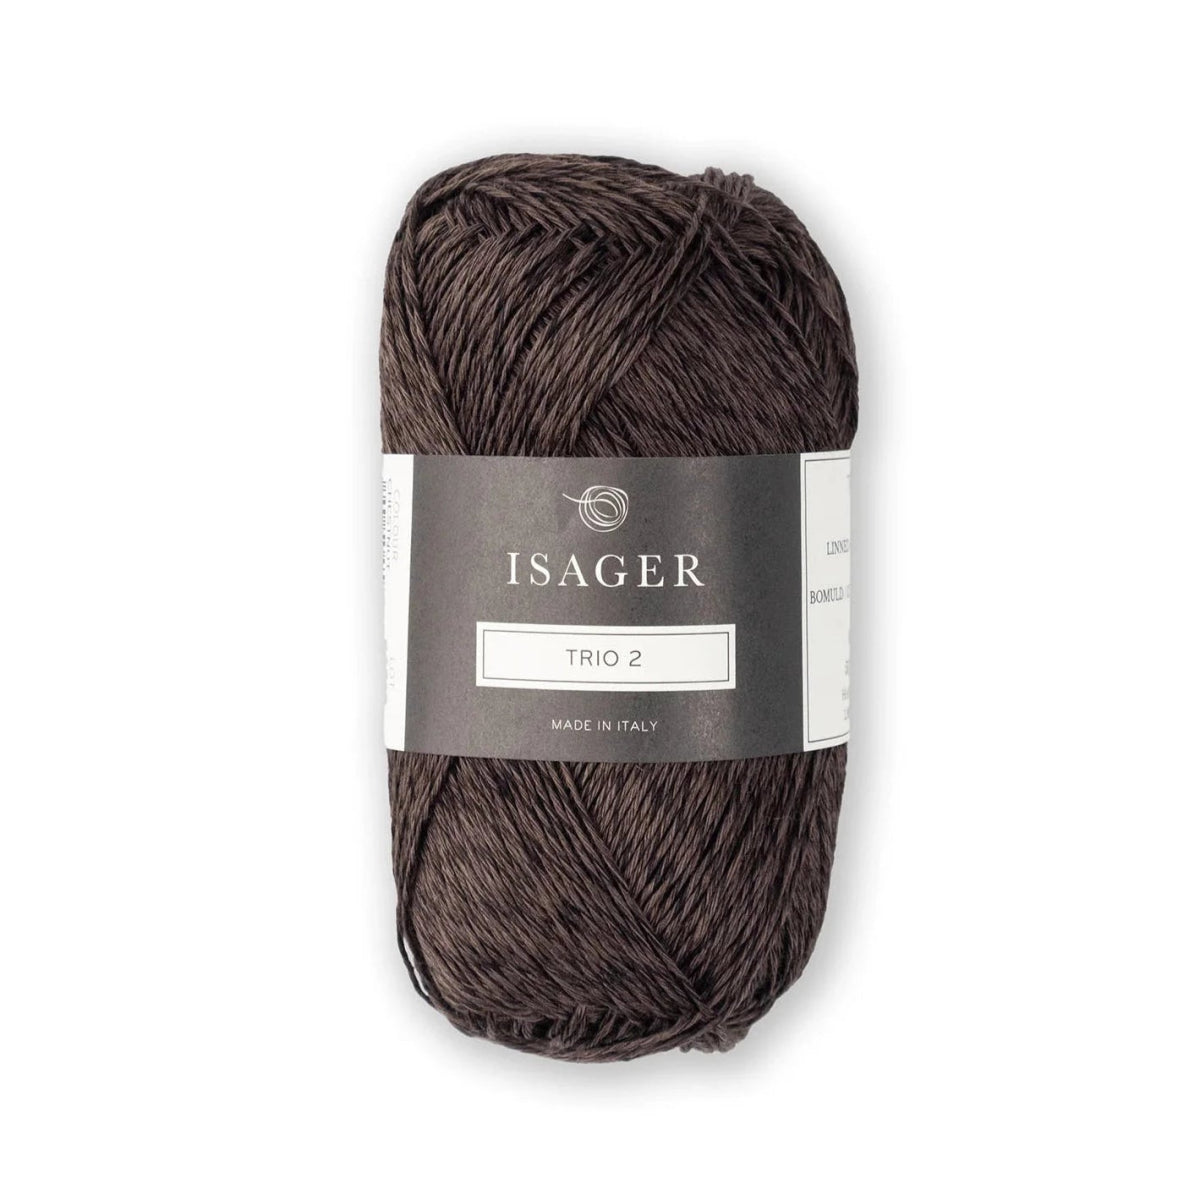 Isager Trio 2 - Chestnut - 5 Ply - Cotton - The Little Yarn Store